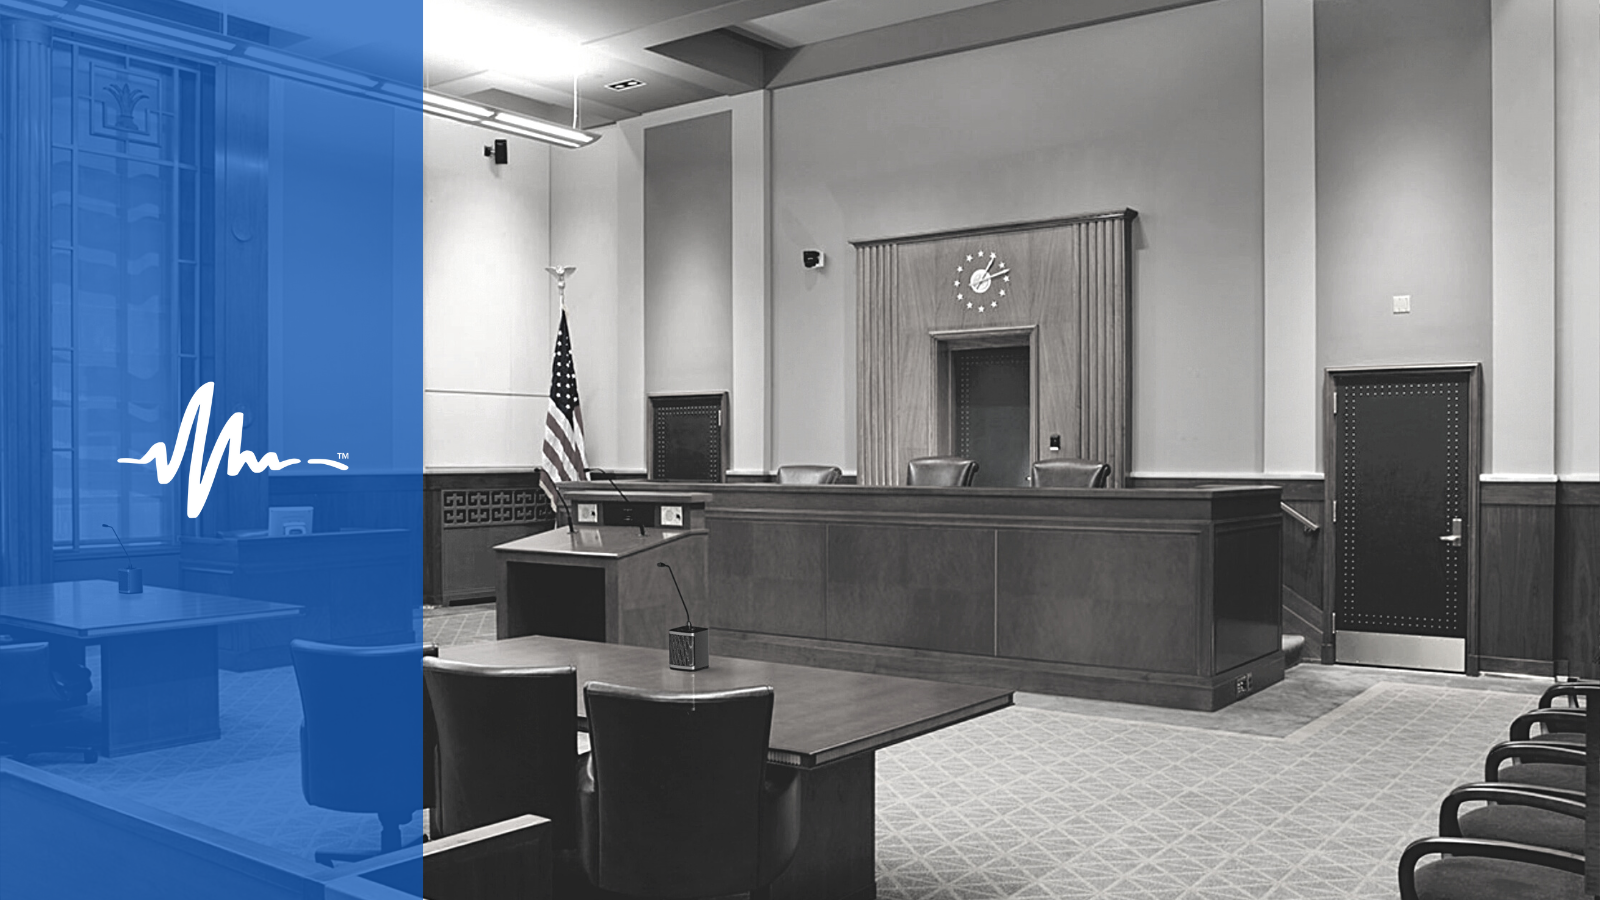 A greyscale image of a US courtroom with a blue overlay and the white For The Record soundwave icon.